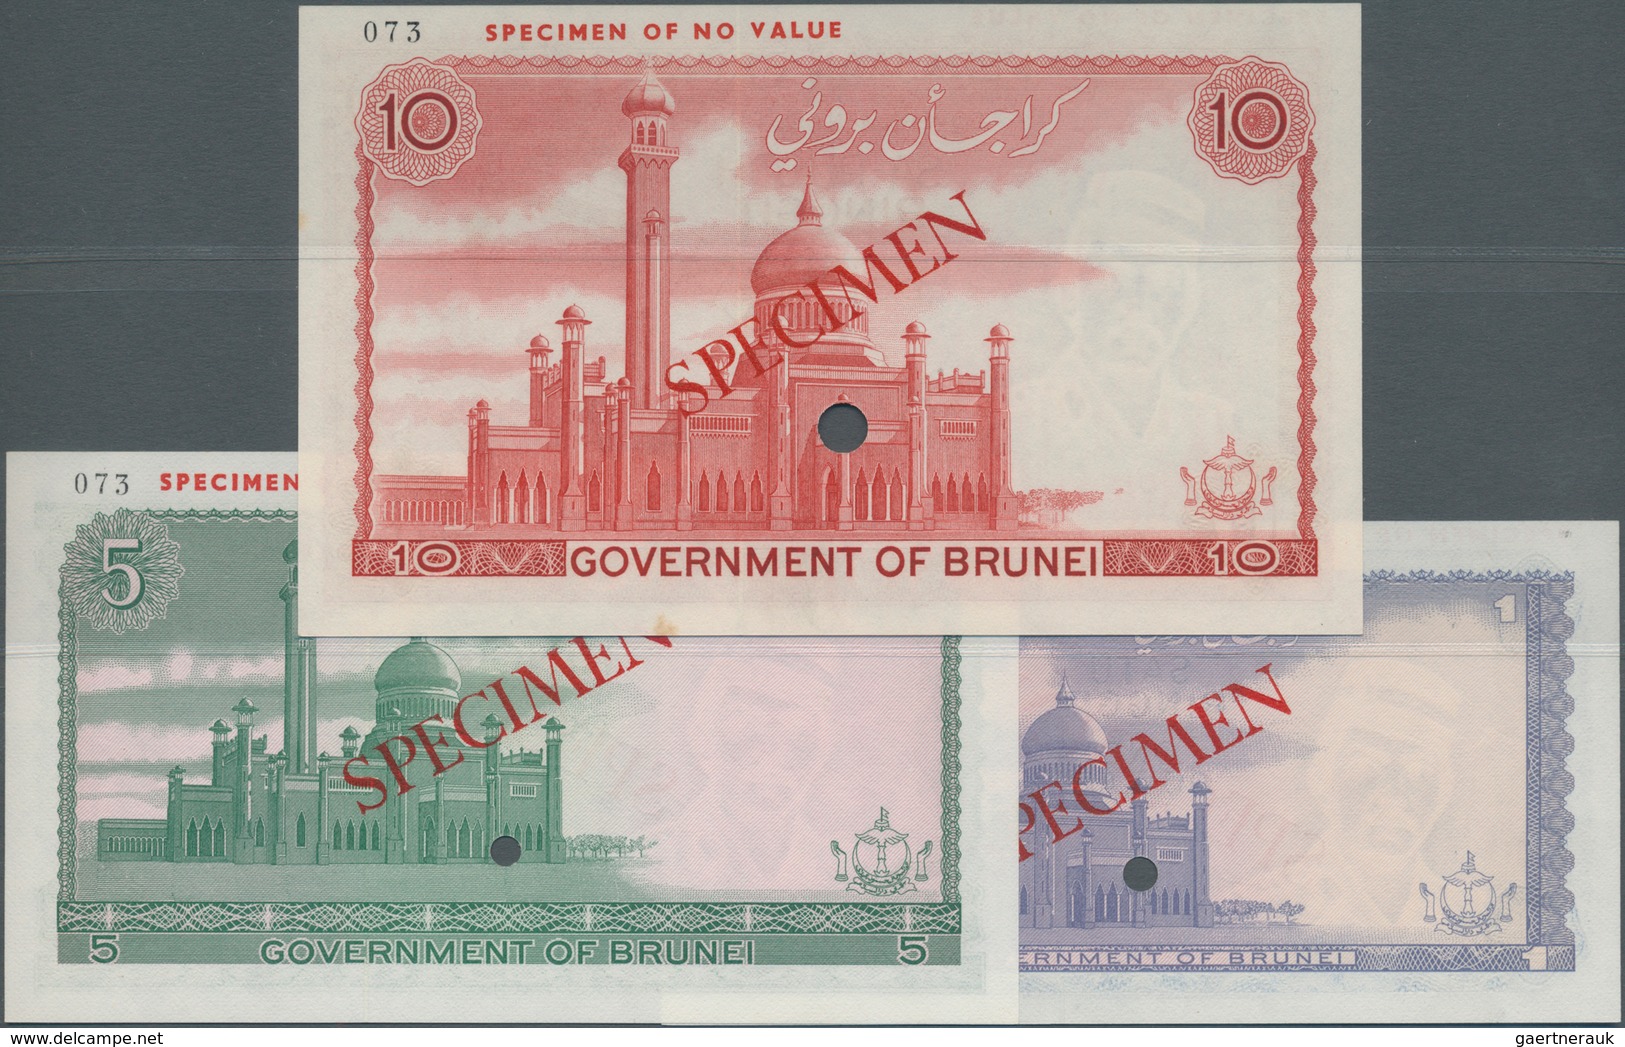 01175 Brunei: Set Of 3 Specimen Banknotes 1, 5 And 10 Ringgit ND P. 6s-8s In Condition: UNC. (3 Pcs) - Brunei